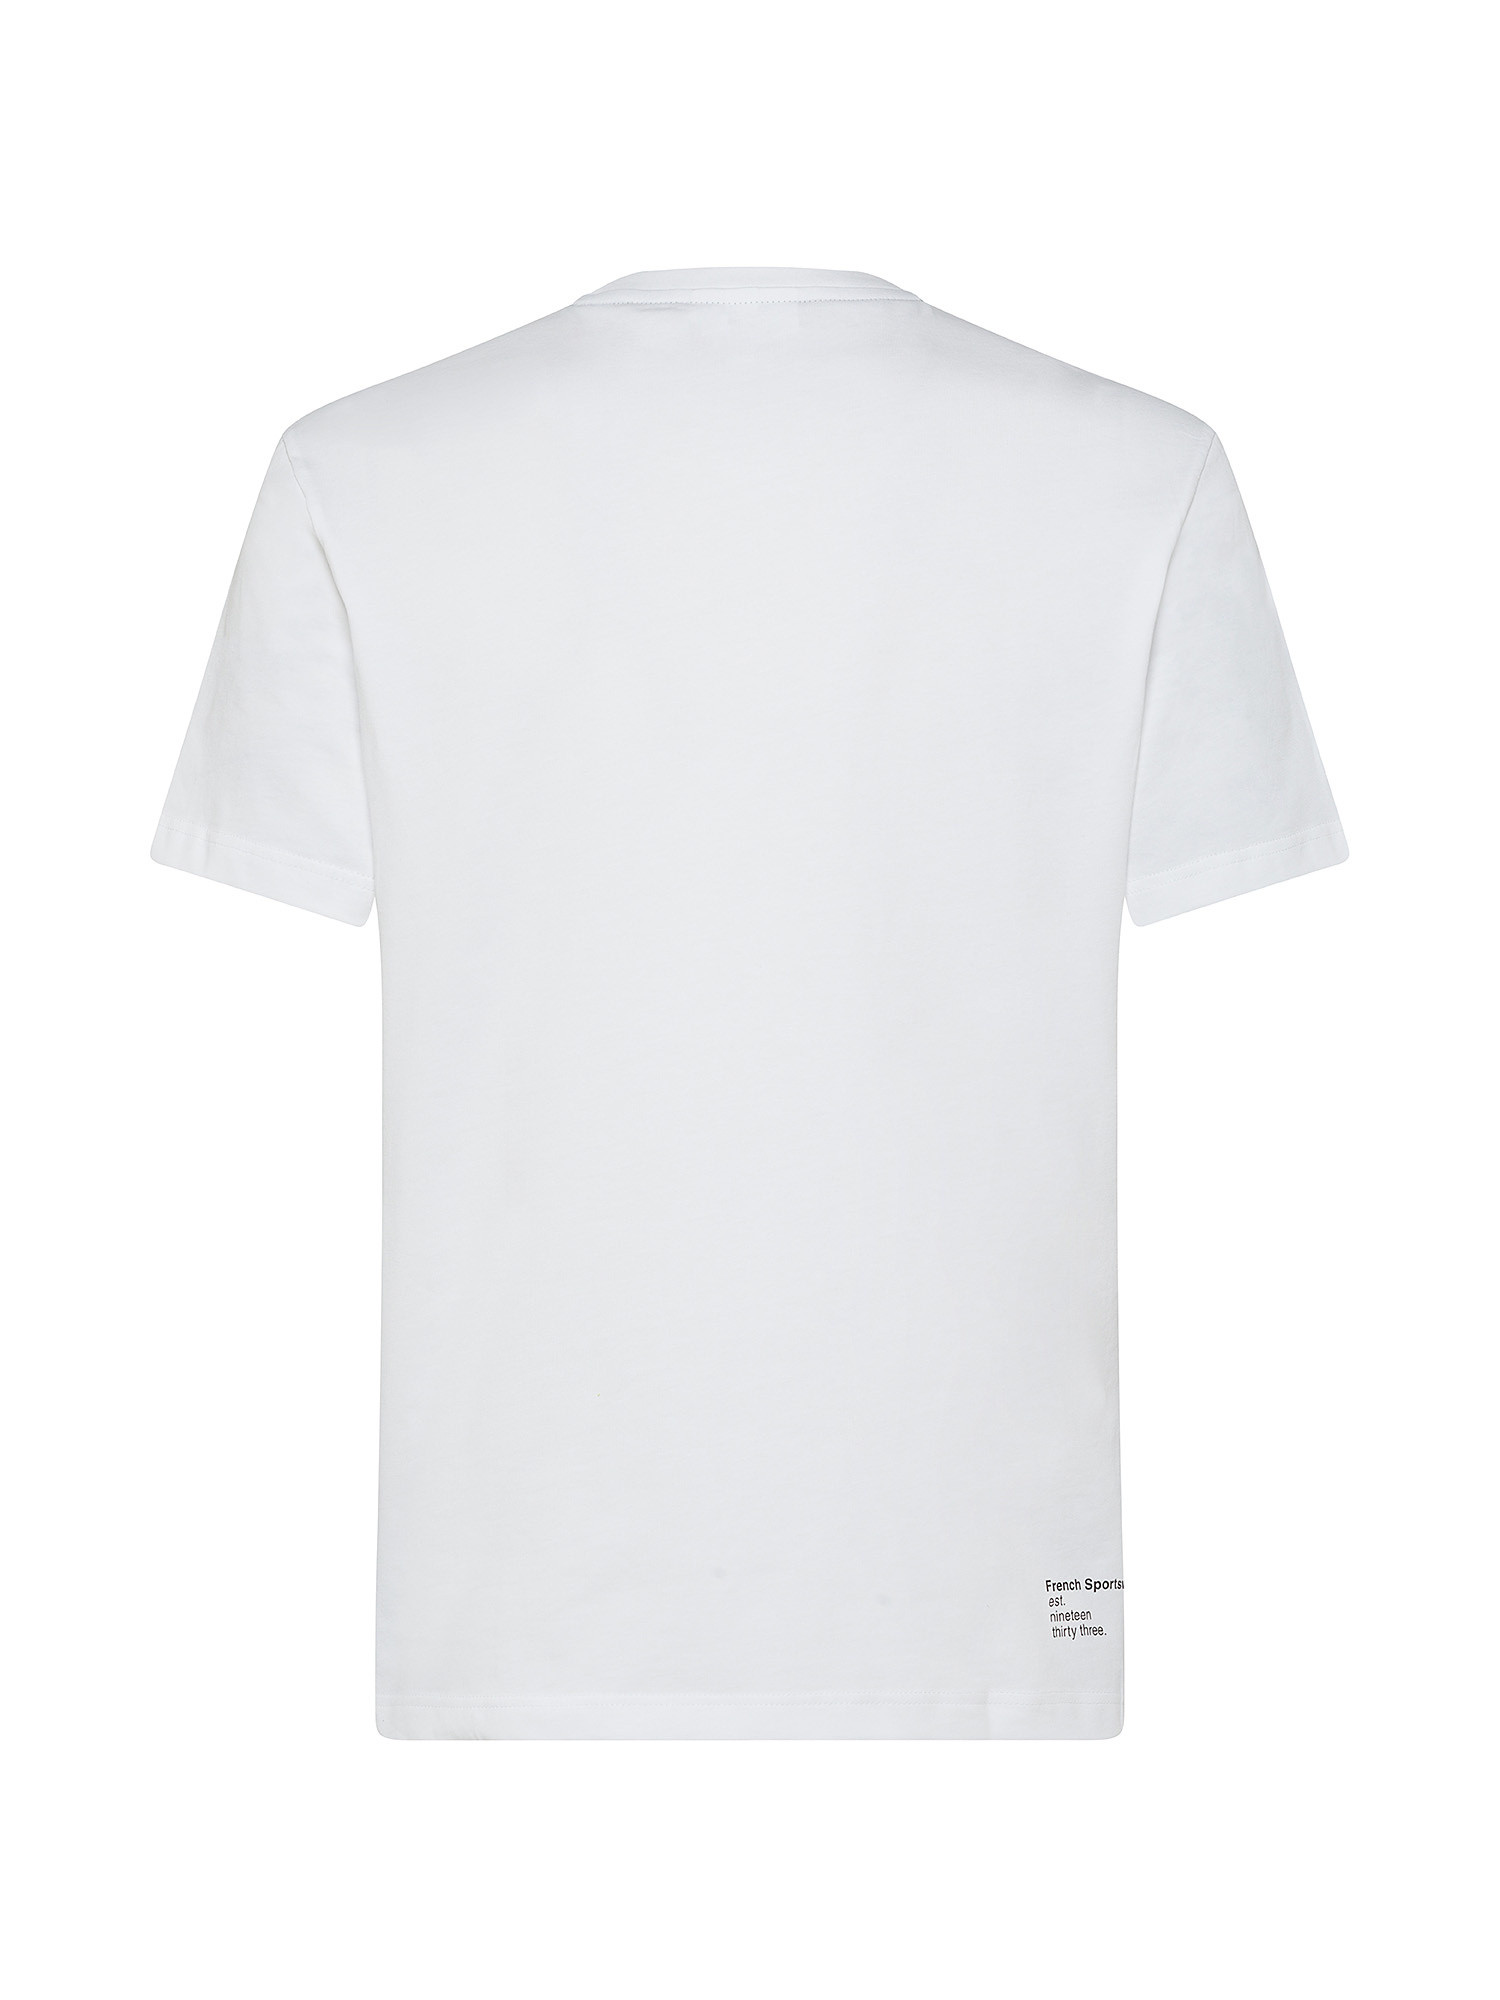 Lacoste - Cotton jersey T-shirt, White, large image number 1